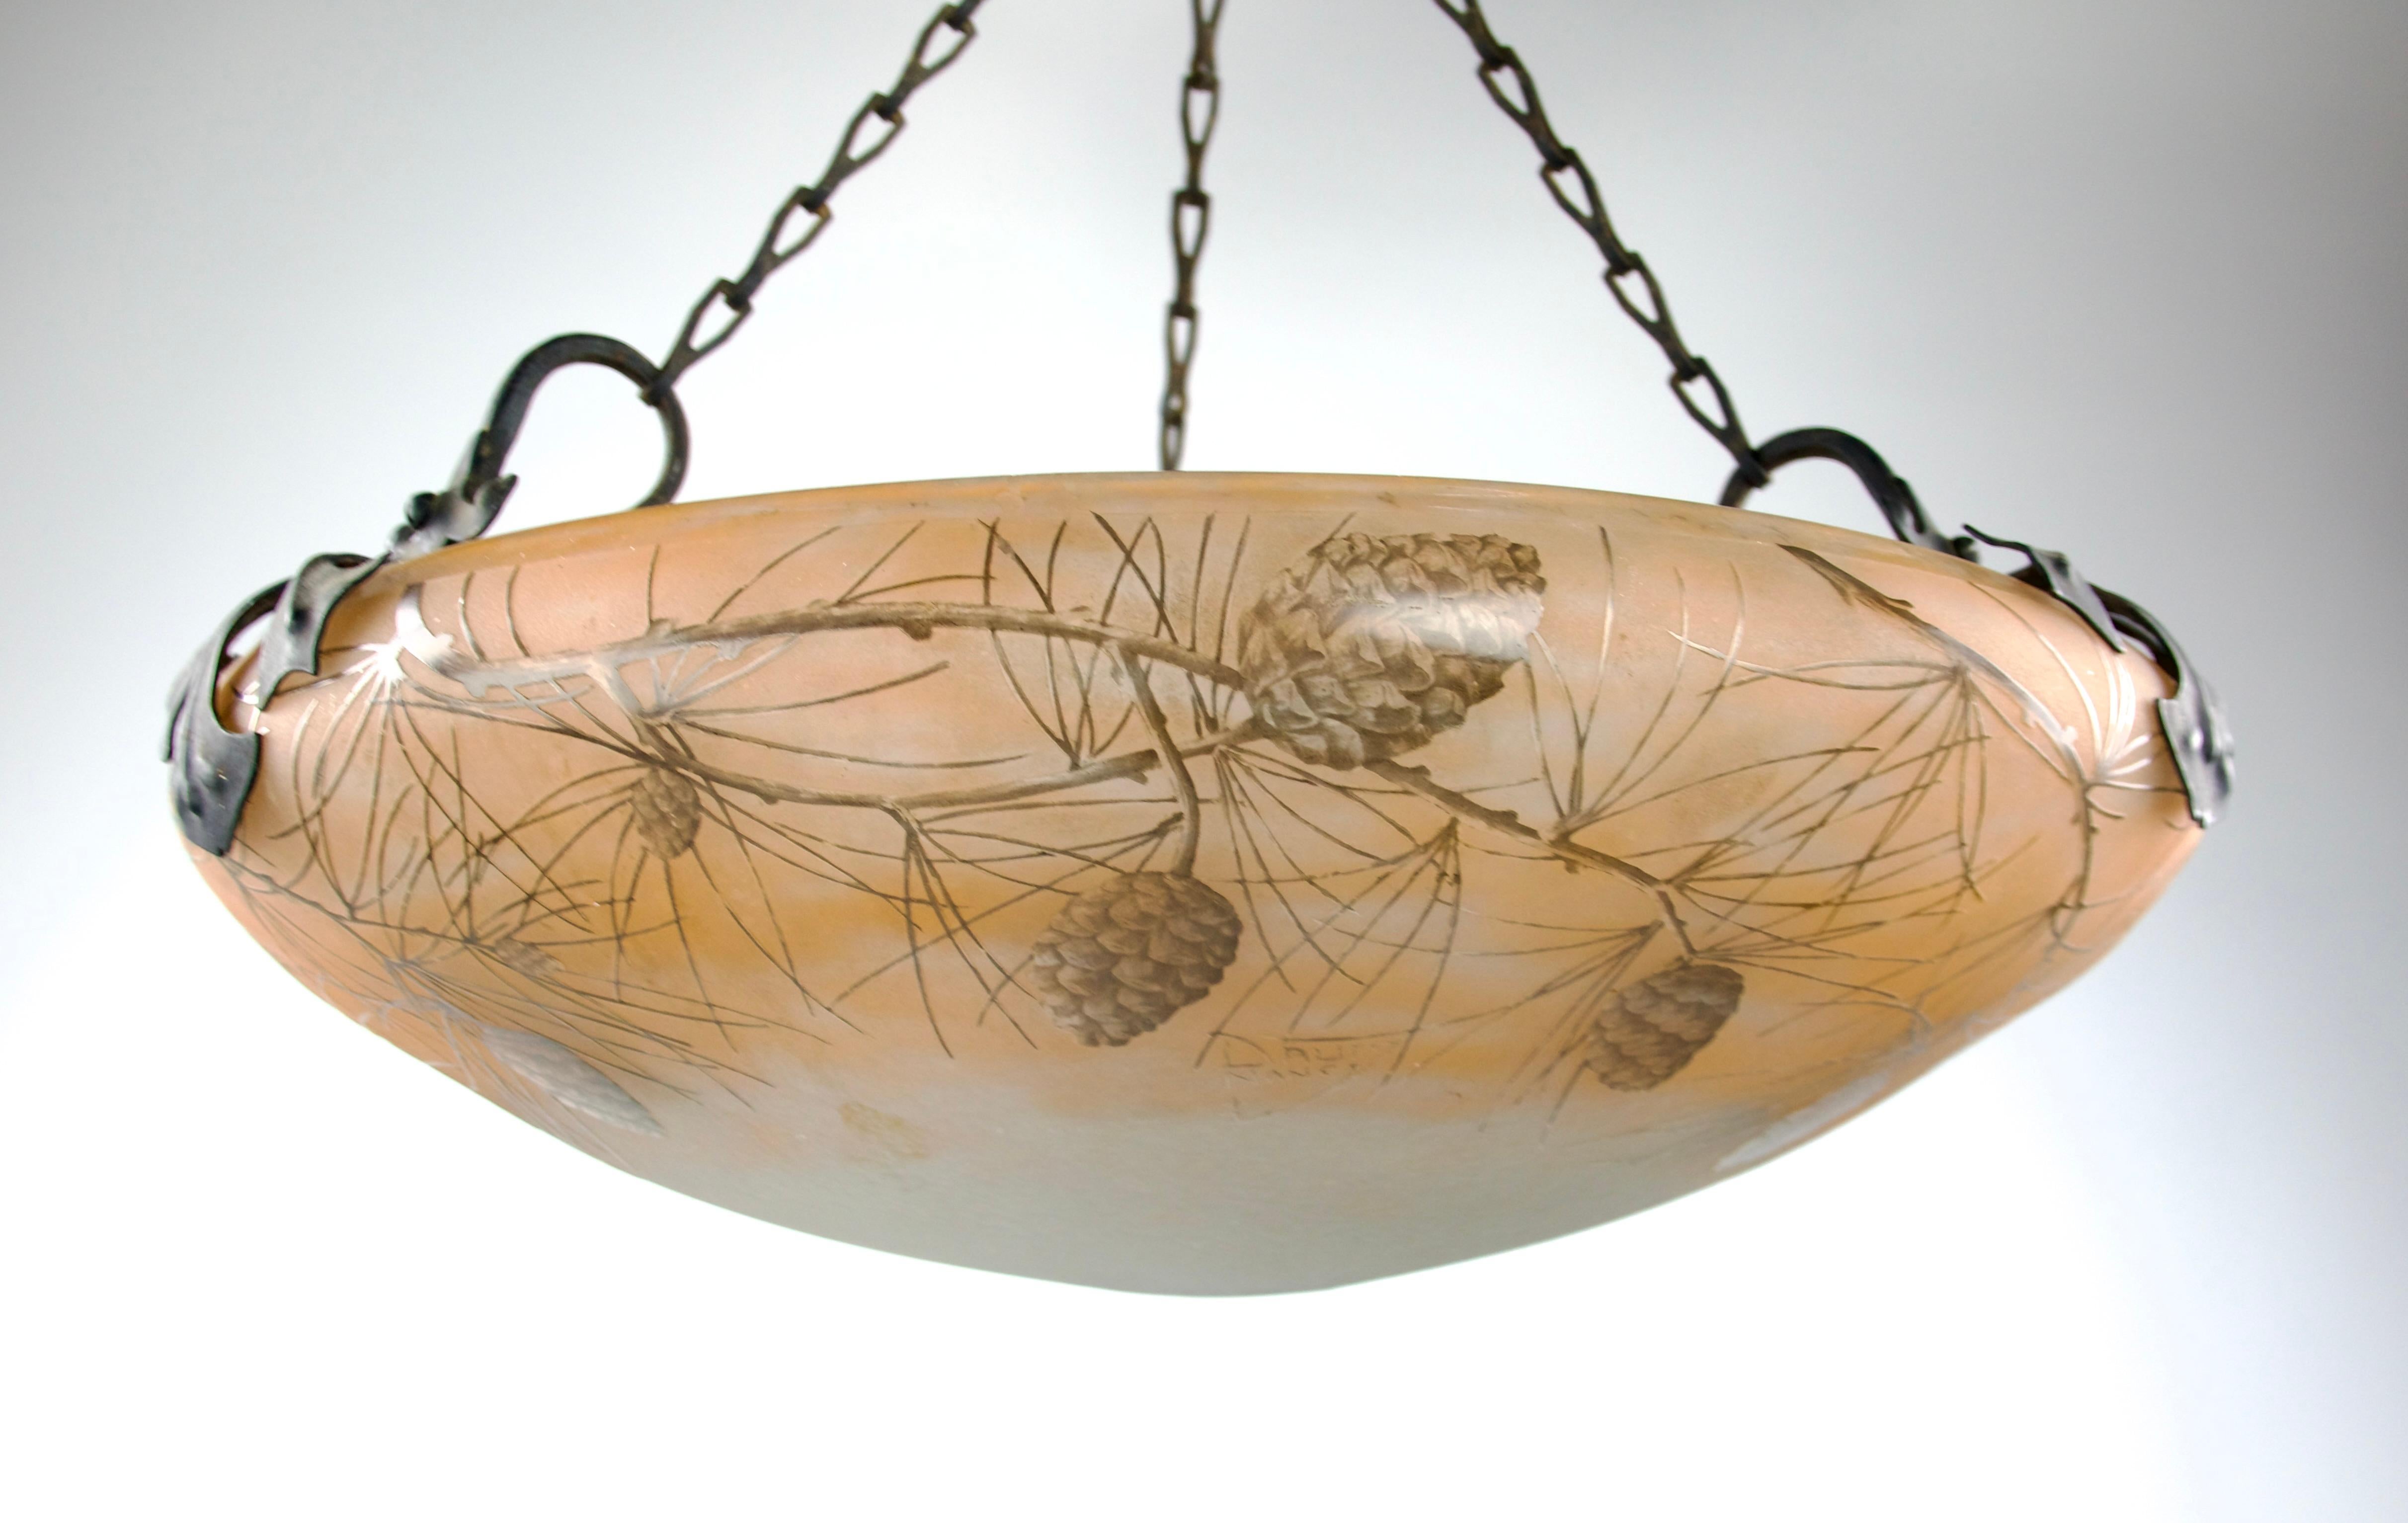 Beautiful and large pine cone etched glass suspension by the Daum # Nancy manufacture in collaboration with Louis Majorelle for the iron works. France early 1900s.

In good condition, slight signs of use and minuscule chips on the pine